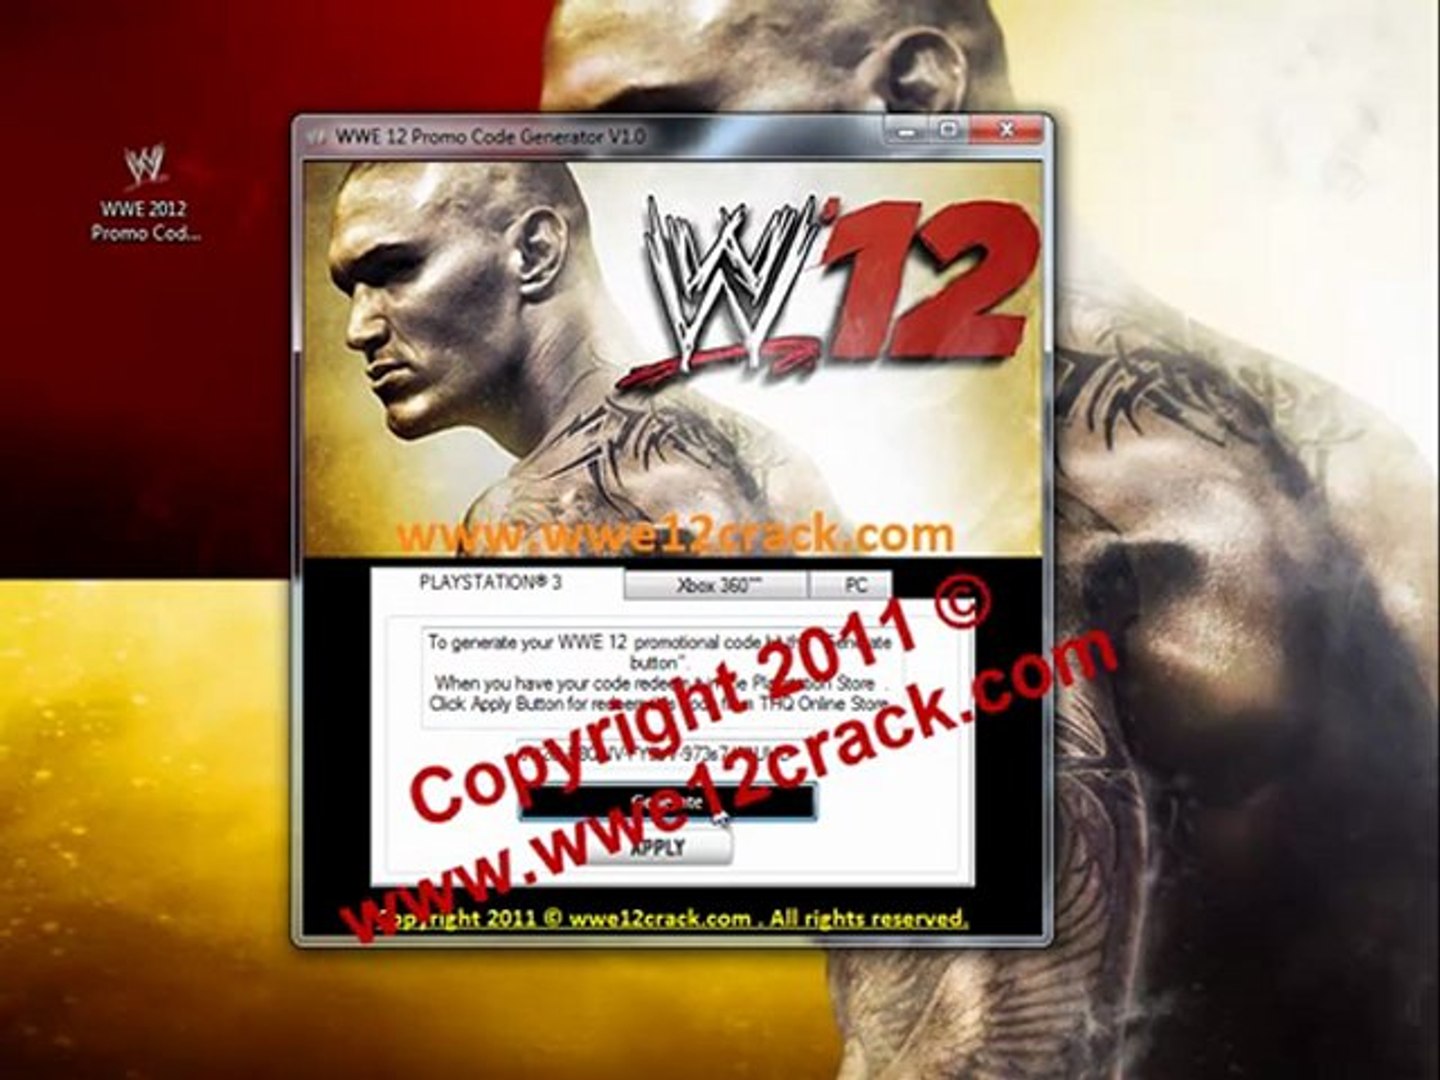 How to Get WWE 12 For Free(PS3, Wii, Xbox 360) - video Dailymotion